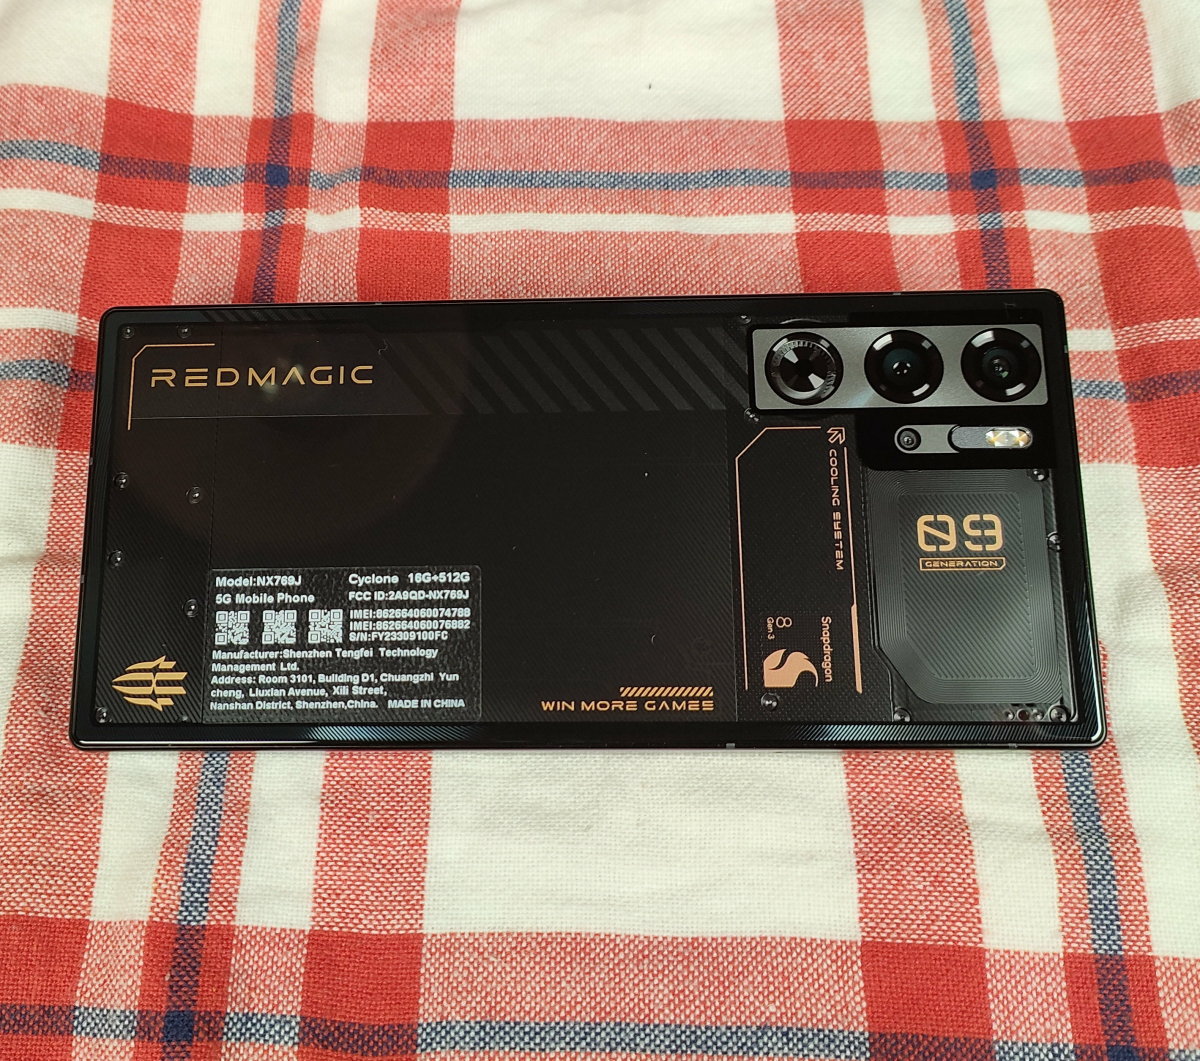 Review of the REDMAGIC 9 PRO Gaming Smartphone